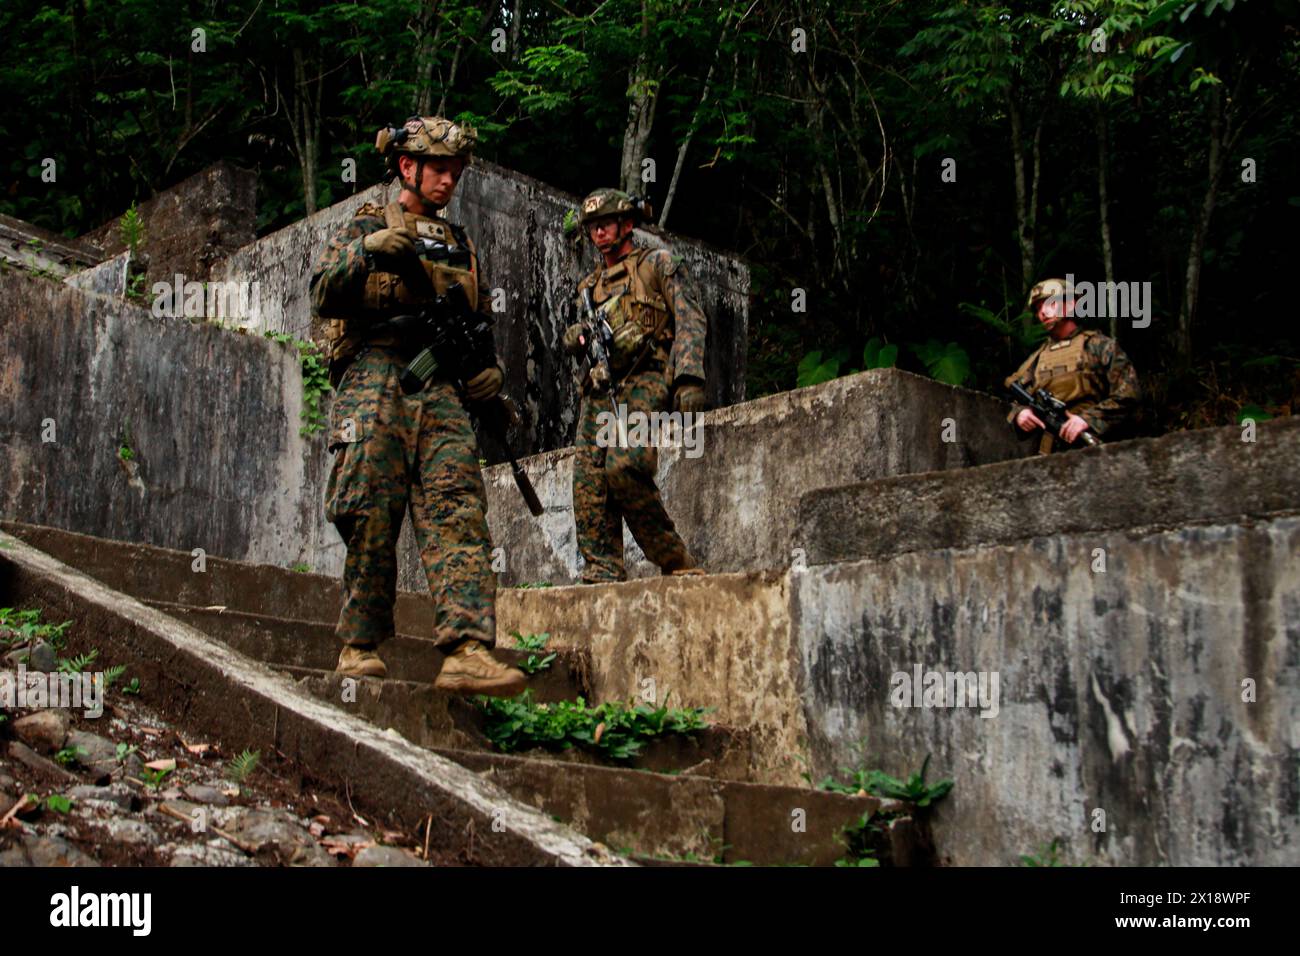 U.S. Marines with Echo Company, 2nd Battalion, 1st Marine Regiment, 1st Marine Division, conduct a jungle patrol during Marine Exercise 2024 near Cotabato City, Mindanao, Philippines, April 9, 2024. MAREX 2024 is a bilateral exercise between the U.S. Marine Corps and the Philippine Marine Corps designed to further enhance relationships, interoperability, and combined arms capabilities in a realistic training environment. (U.S. Marine Corps photo by Sgt. Ryan Hageali) Stock Photo